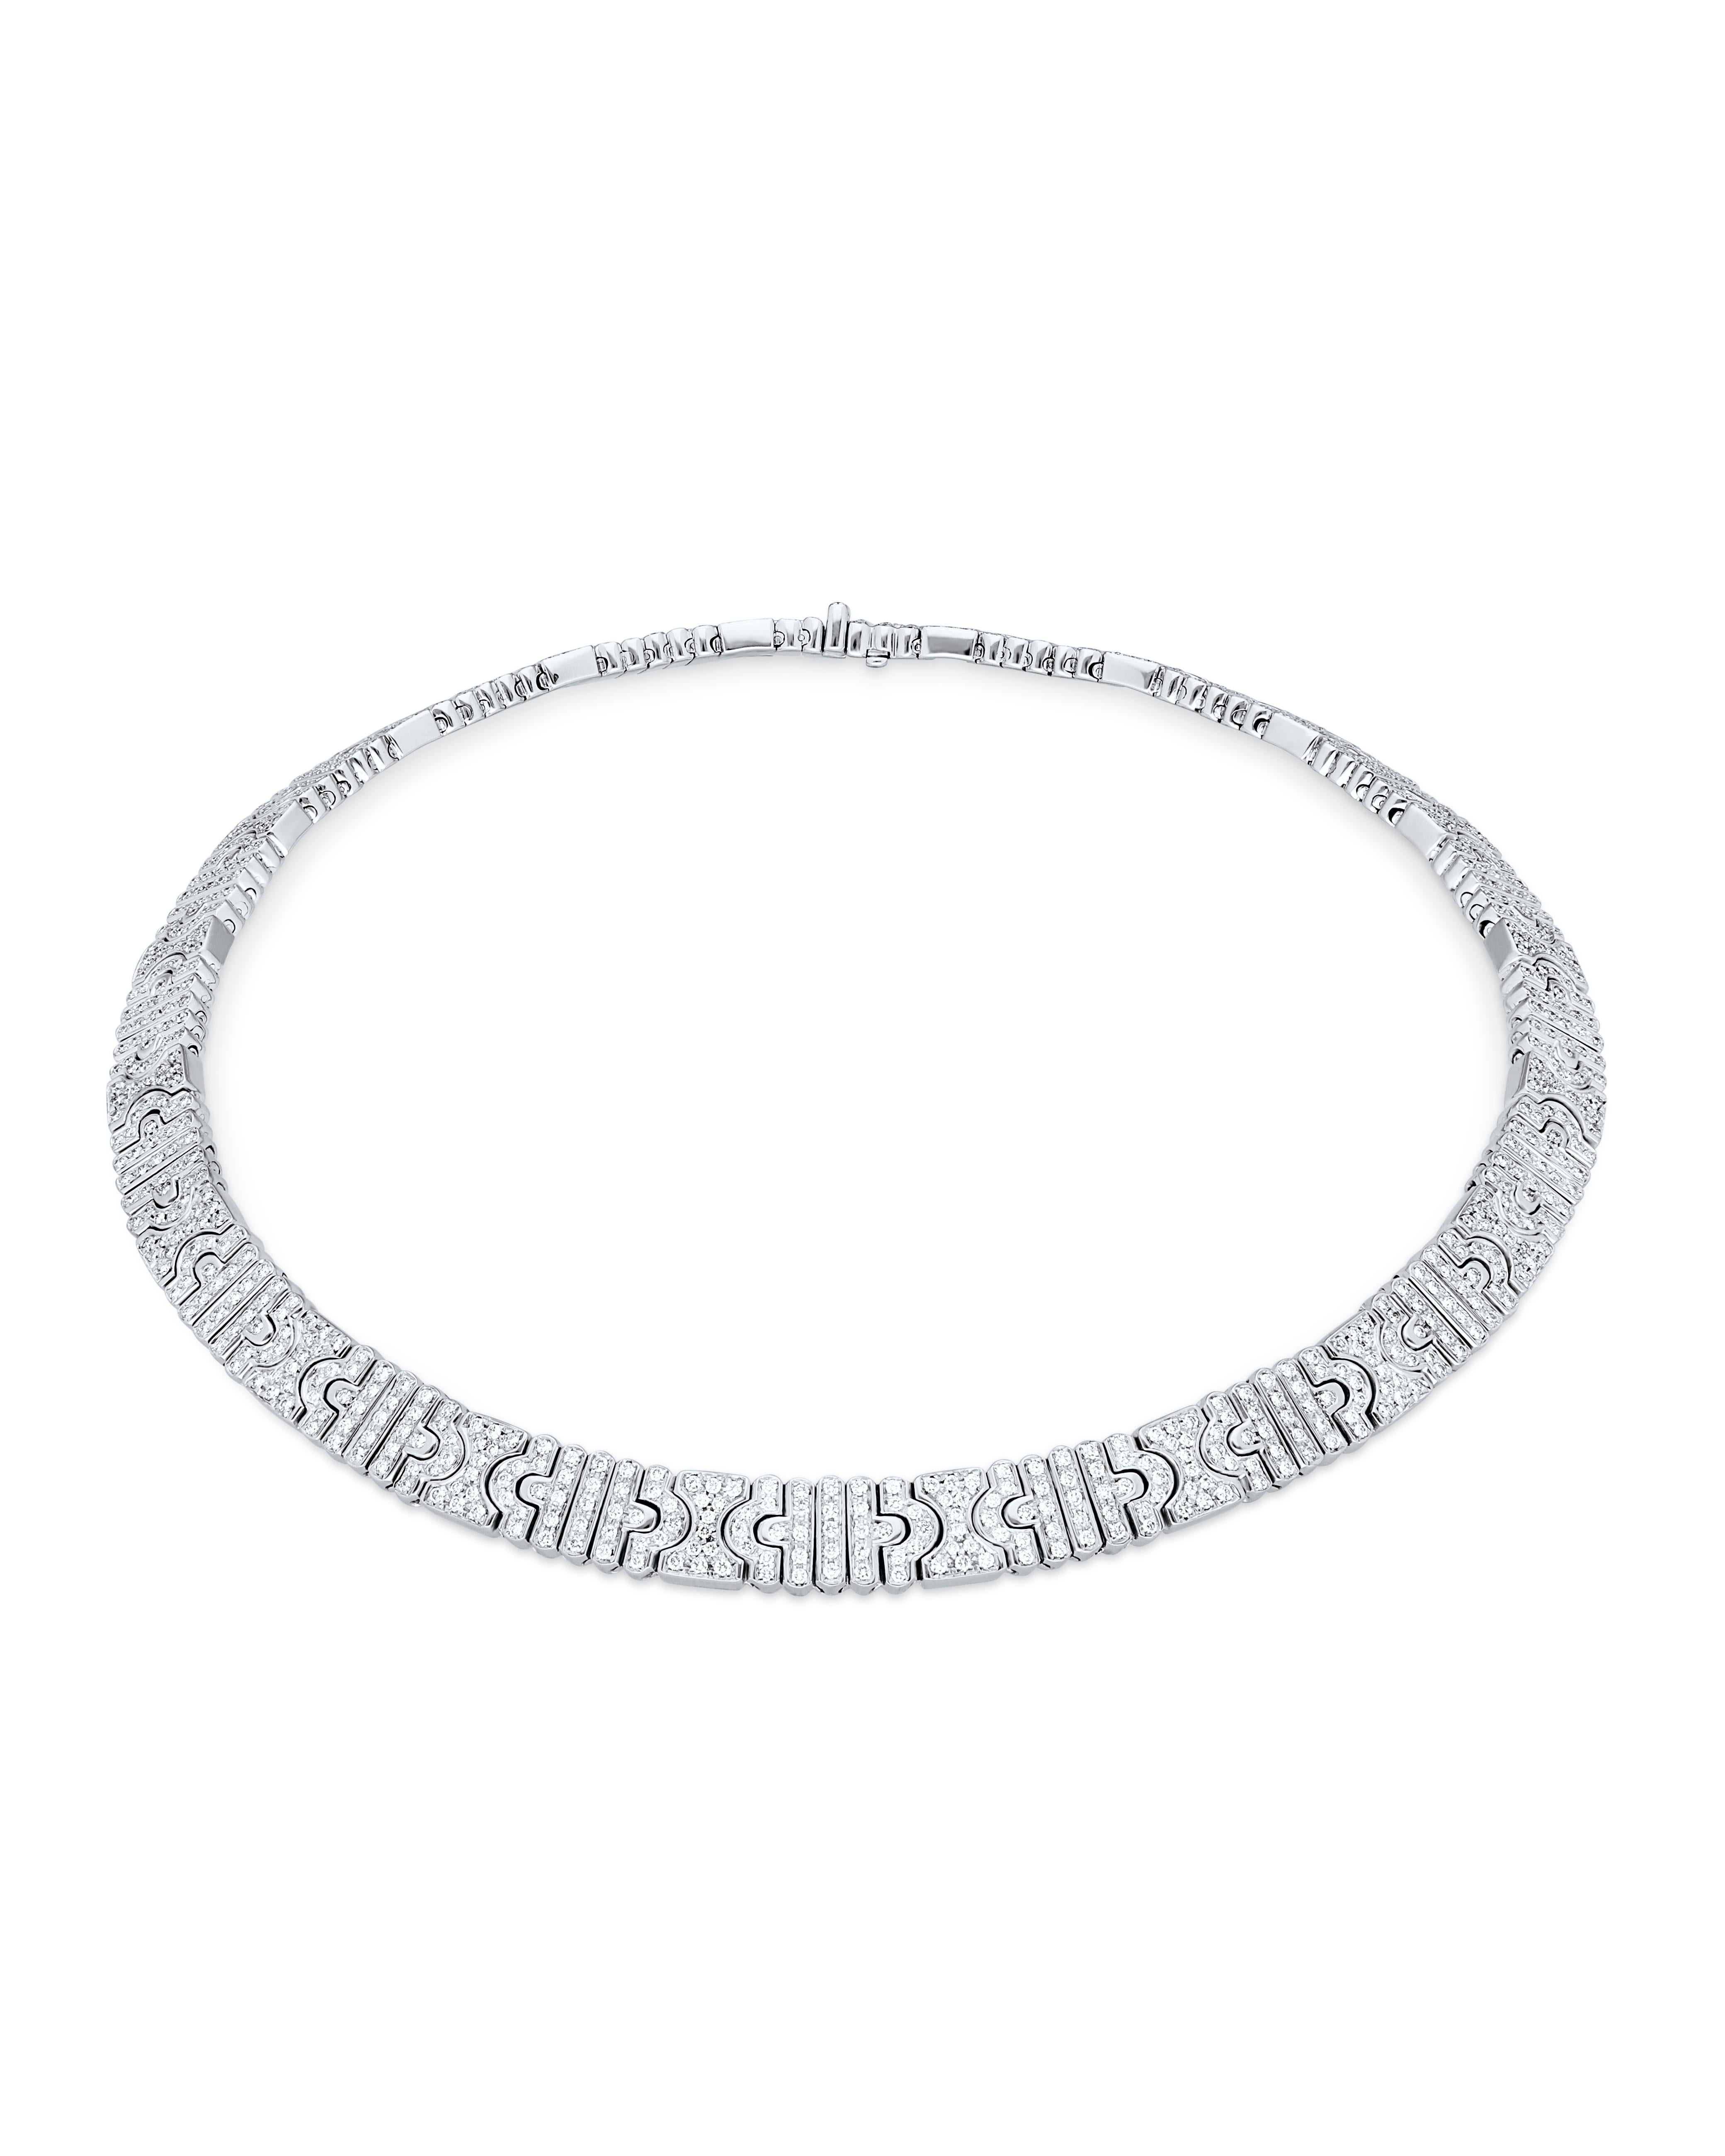 Bulgari Parentesi Necklace Choker
The necklace is 18k White Gold
There are 8.60 Carats in White Diamonds
The necklace is 3/8